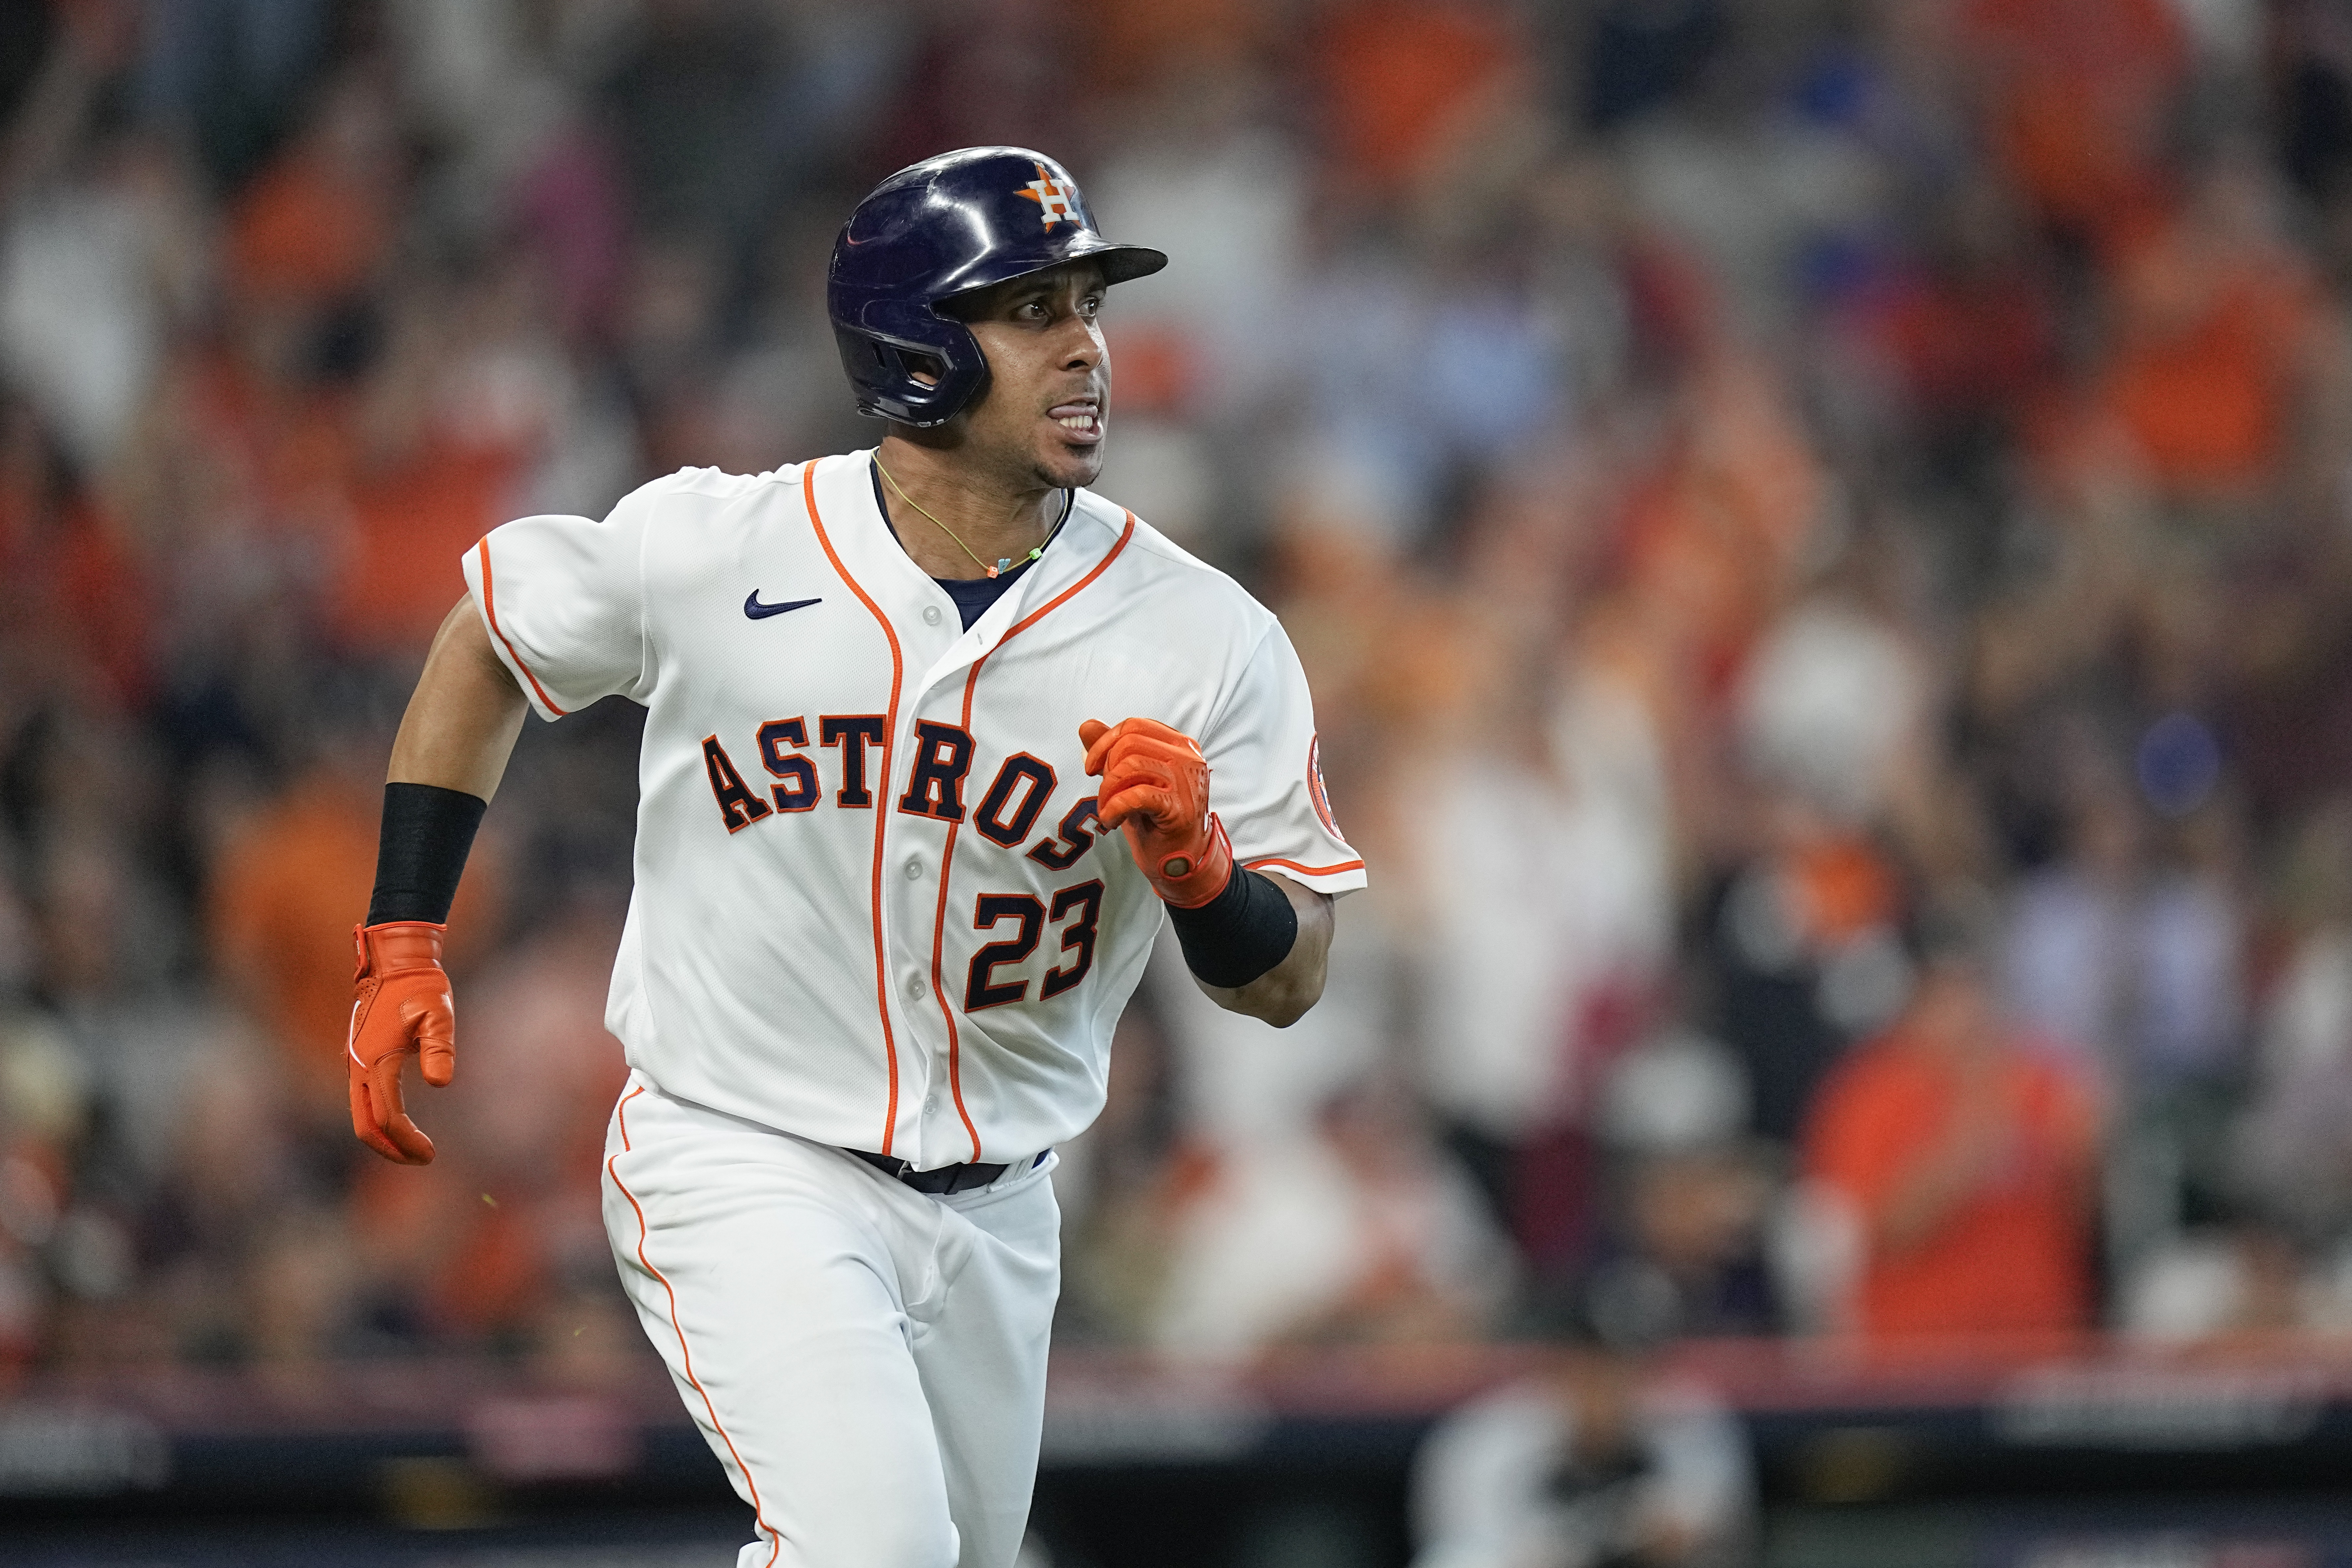 Astros' Michael Brantley to miss rest of season due to shoulder